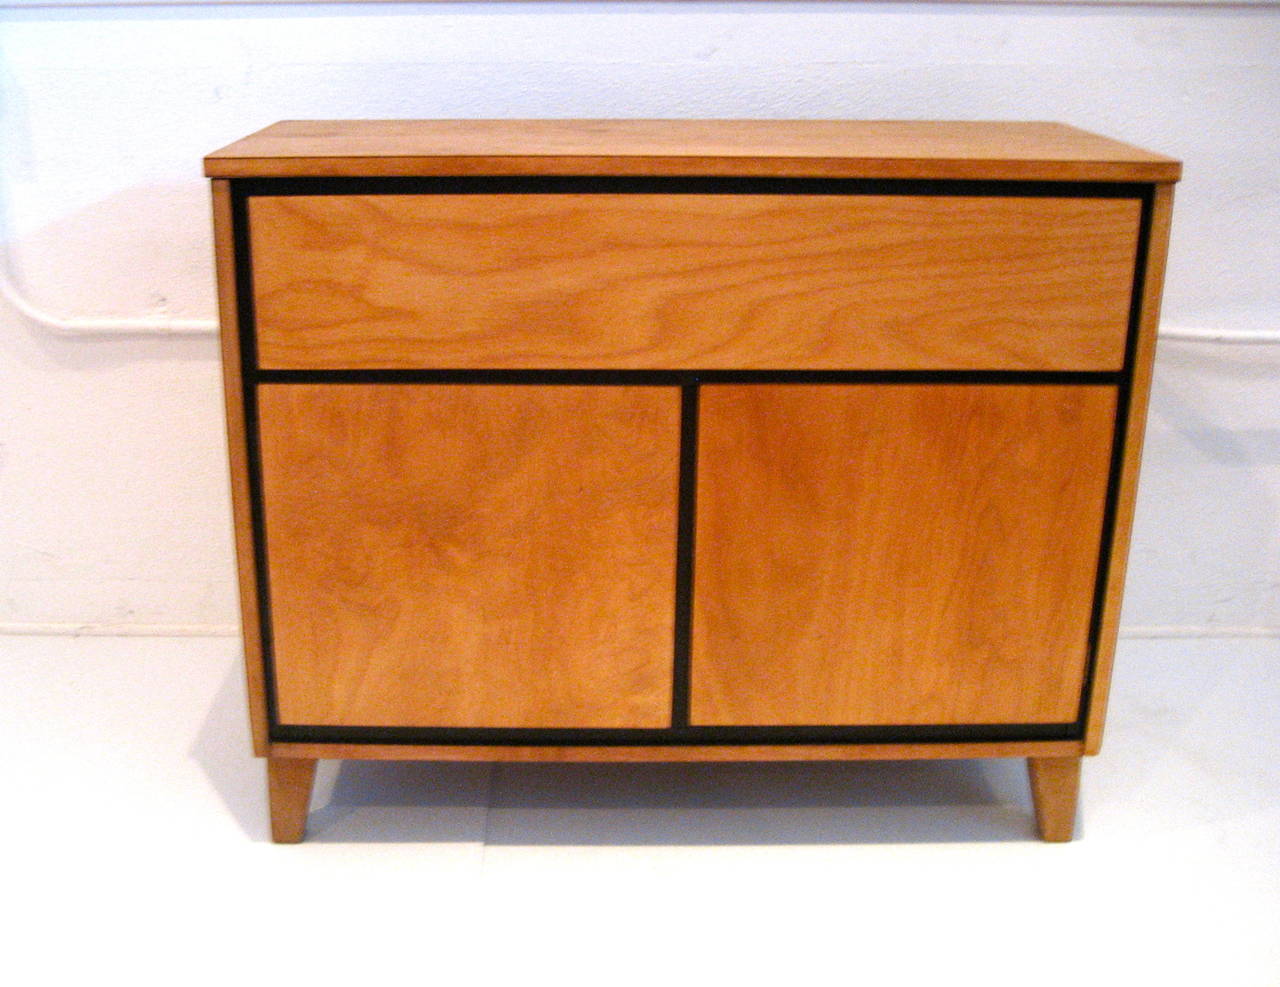 Small kitchen cabinet in solid maple wood designed by Russel Wright for Conant Ball Furniture, totally restored with a black trim edge, circa 1950s part of the American modern atomic age movement. With a top drawer and double door bottom. High